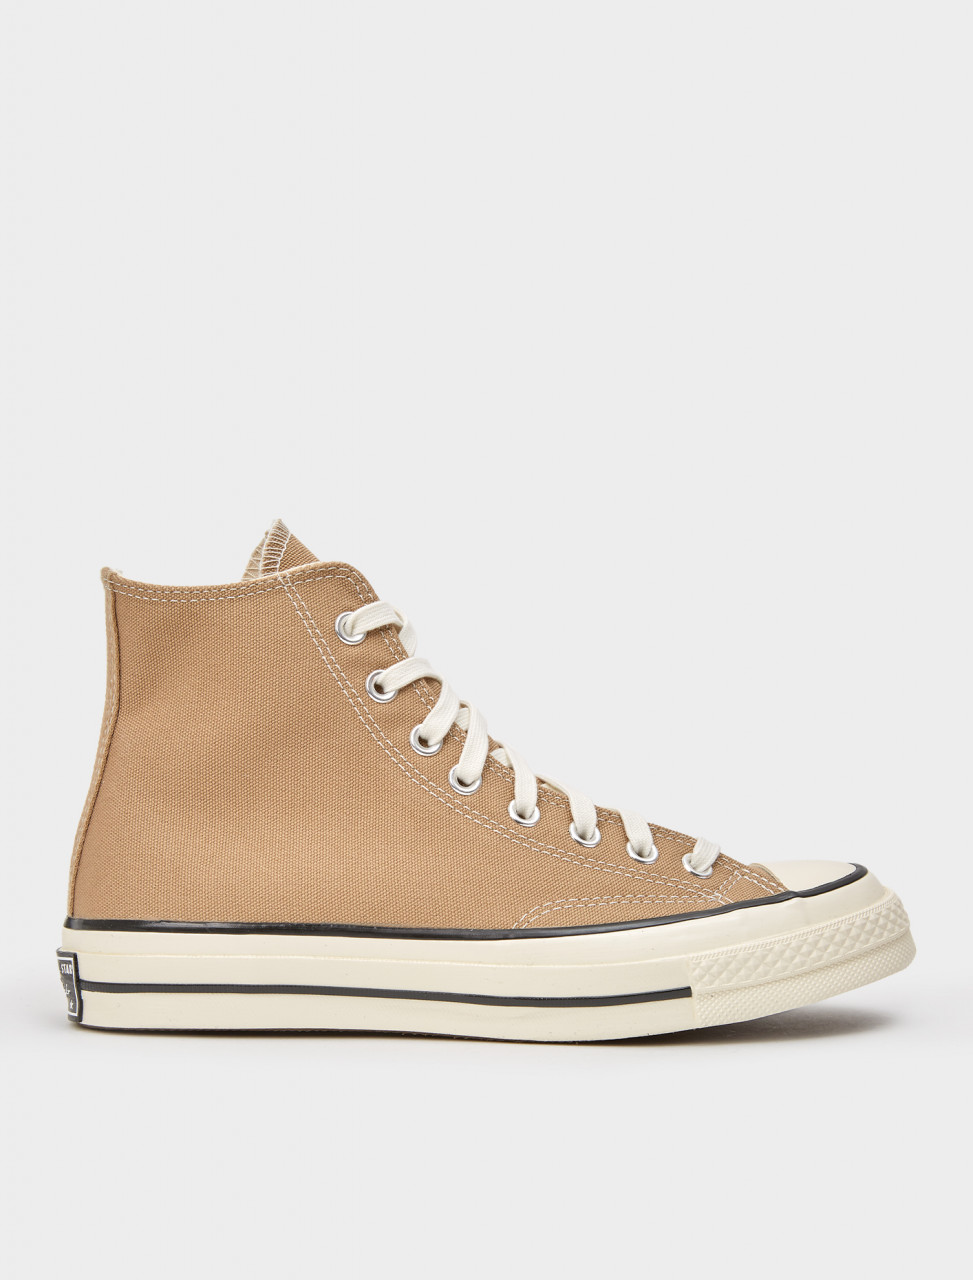 Converse Chuck 70 High Sneaker in Nomad 